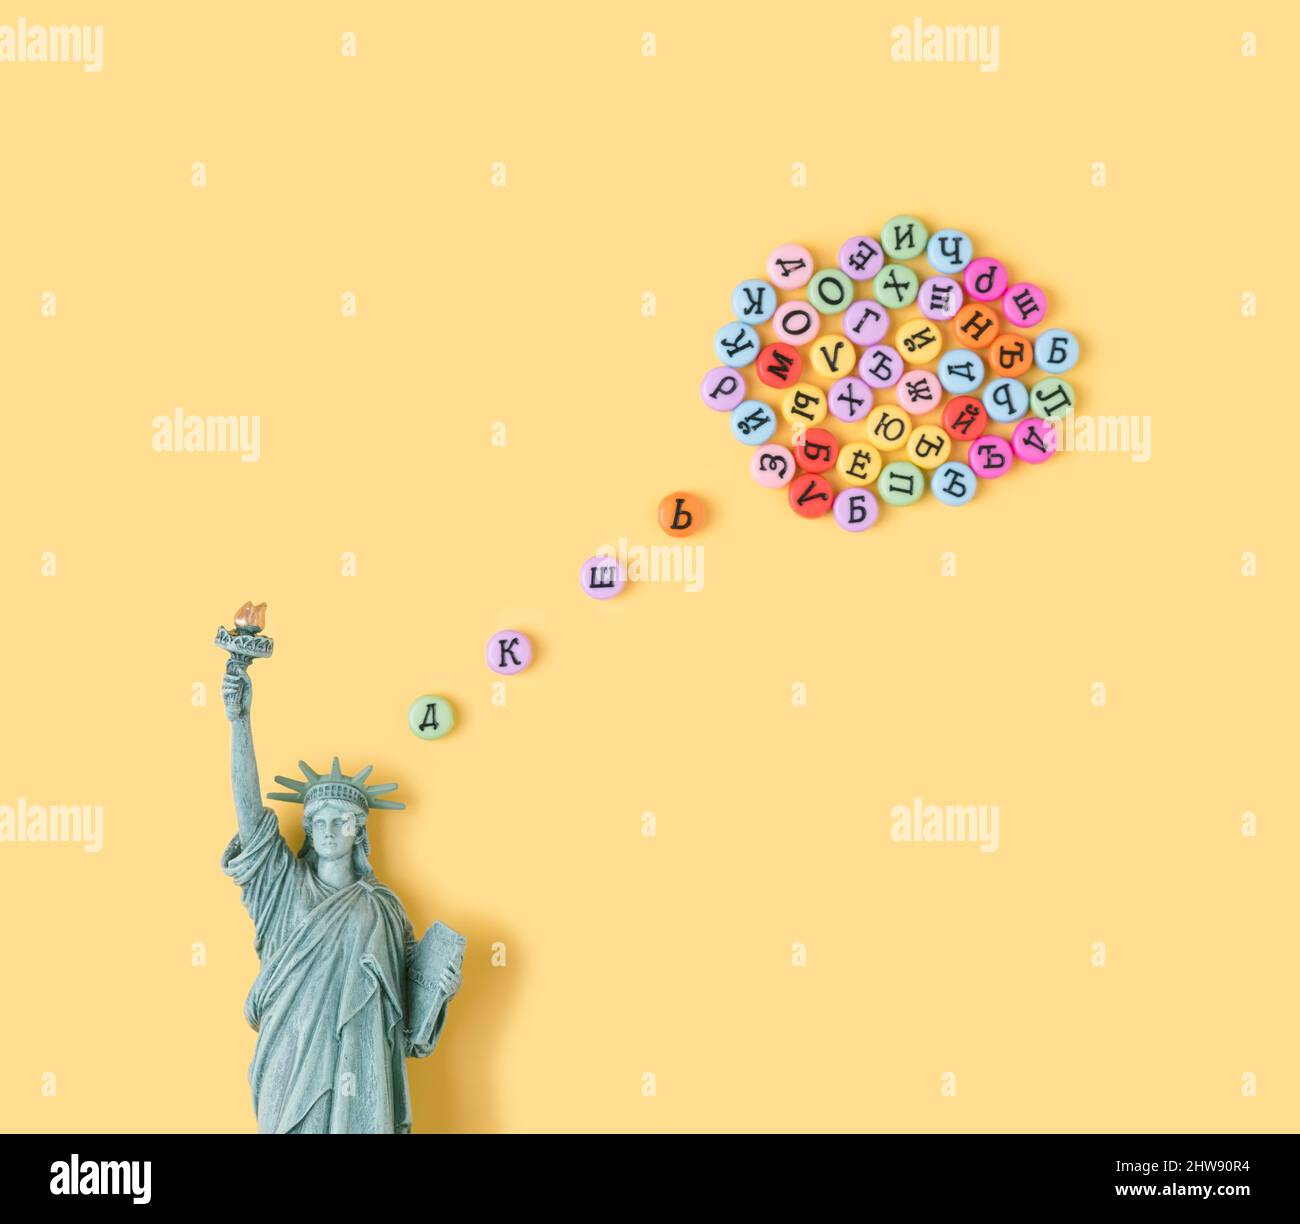 Statue of Liberty with thinking bubble made of cyrillic letters. USA, Russia politics conceptual background. Stock Photo